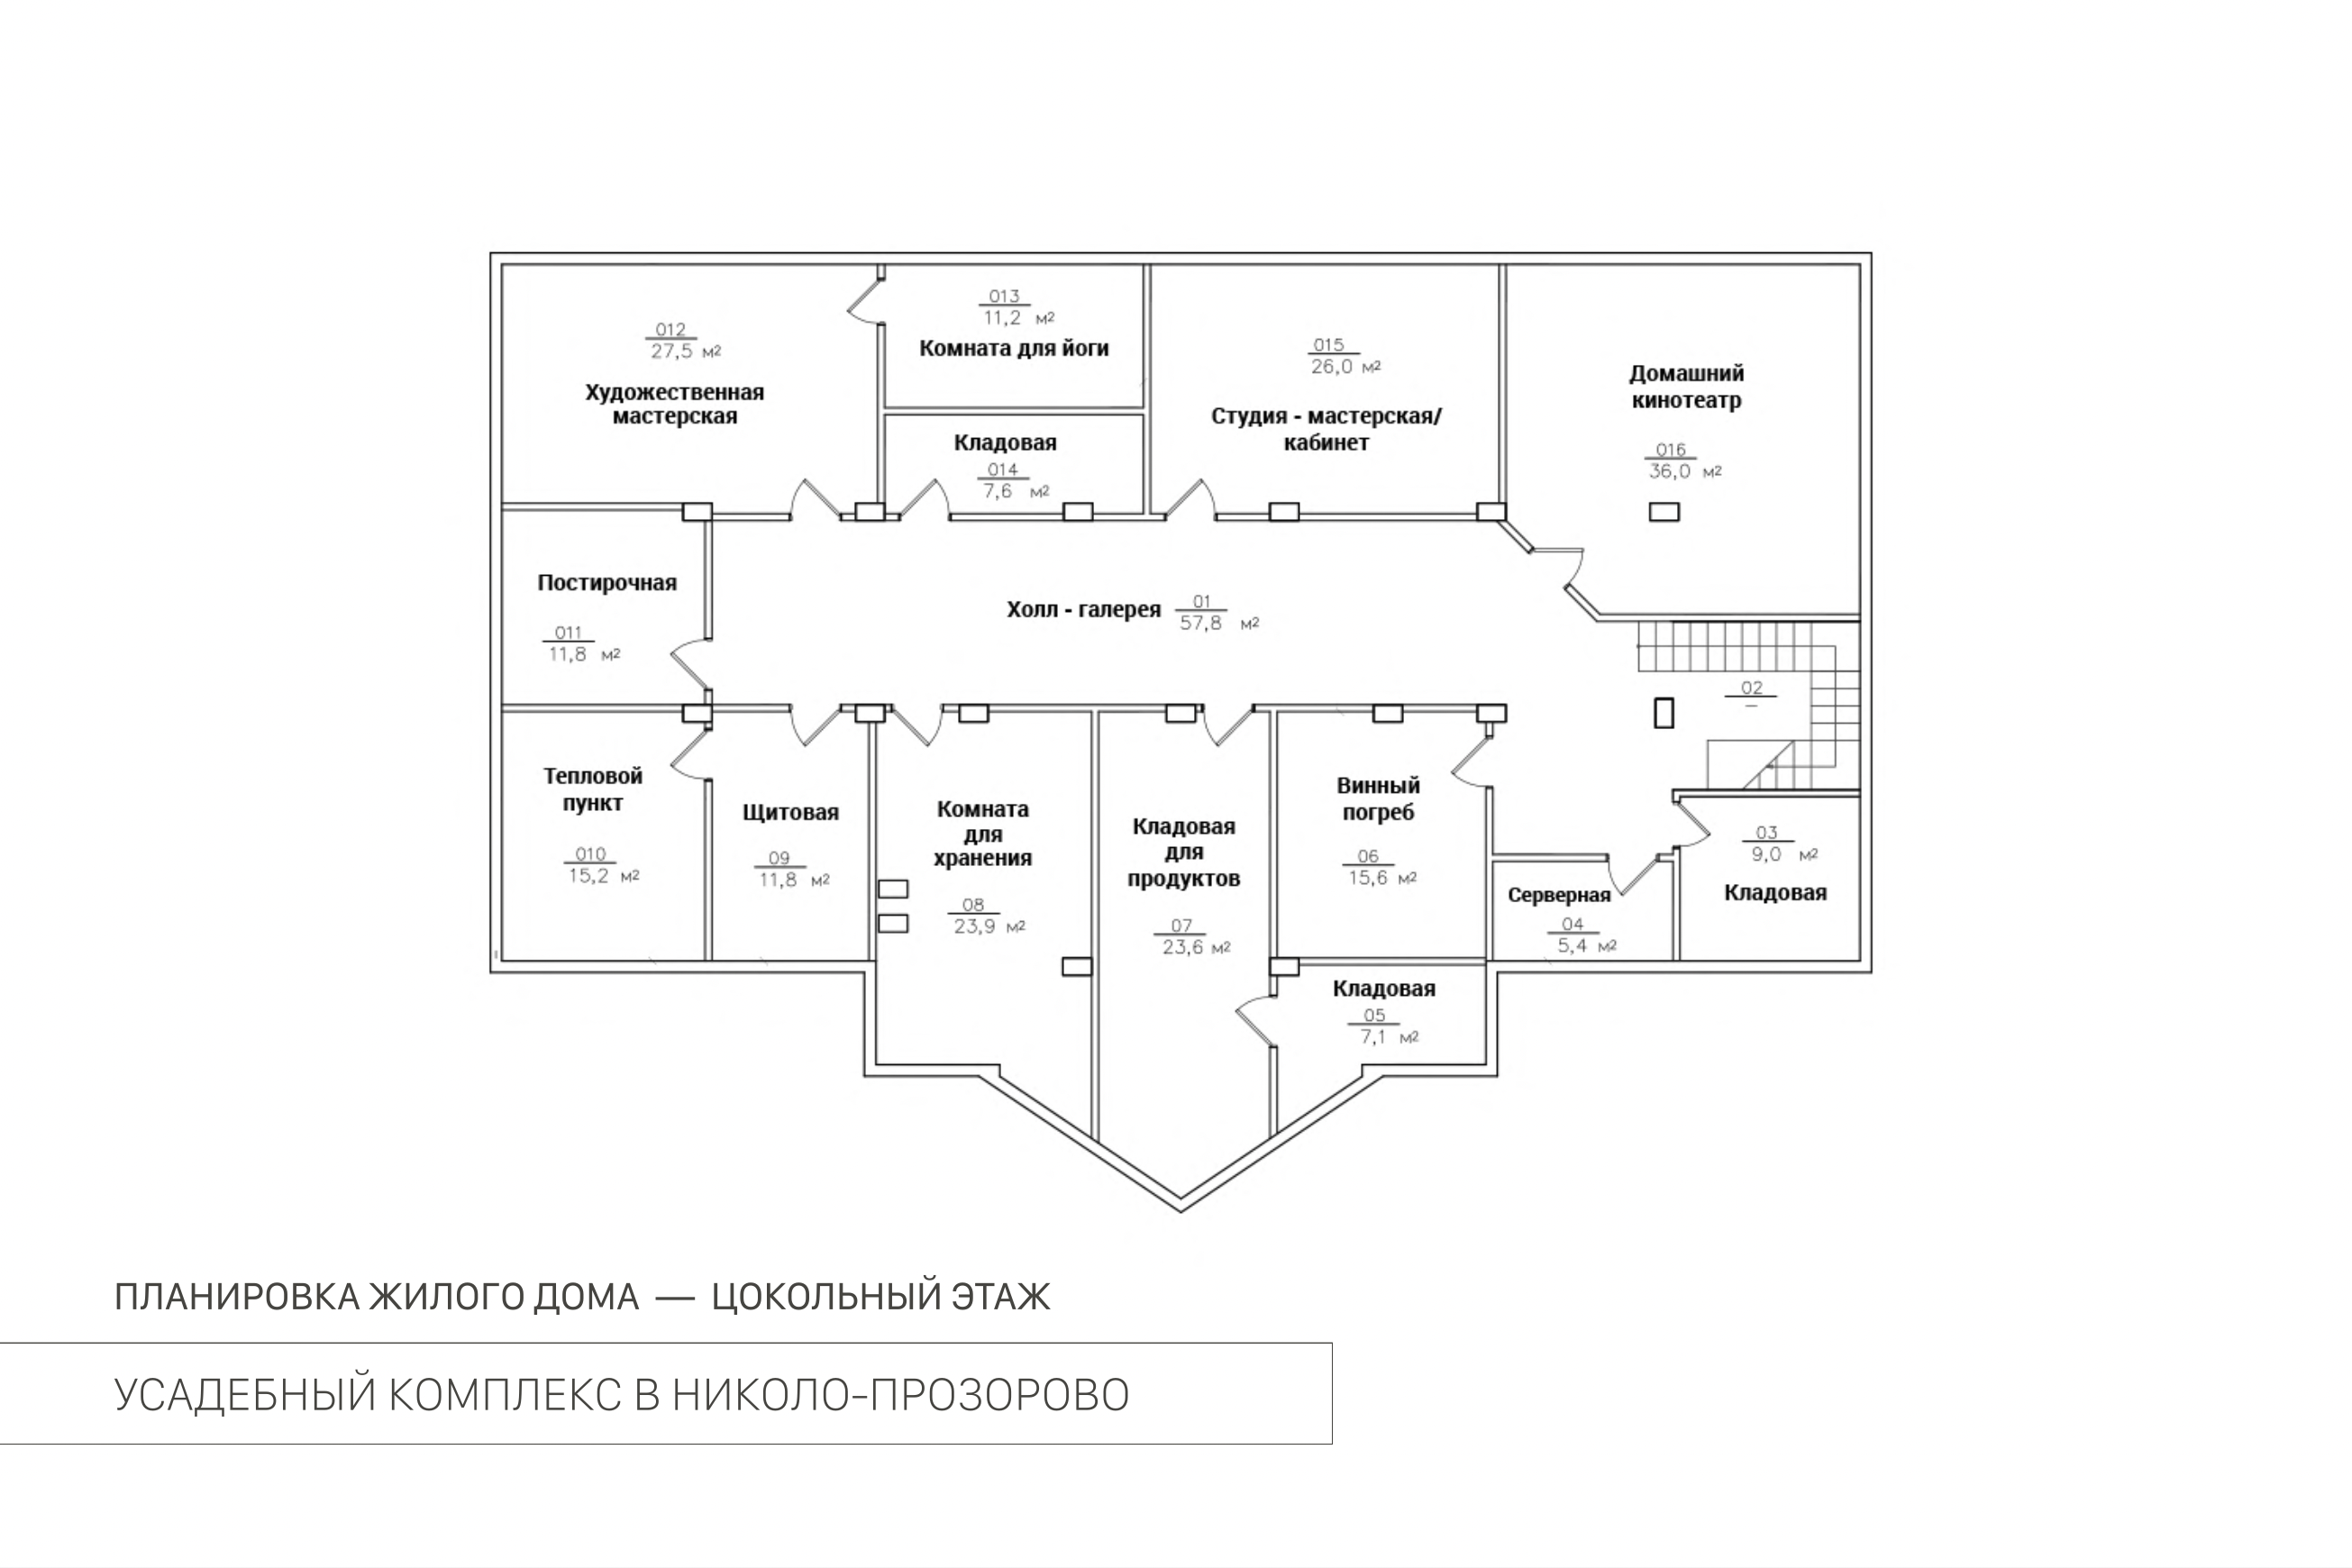 Layout picture Сountry нouse with 5 bedrooms 1100 m2 in village Nikolo-Prozorovo